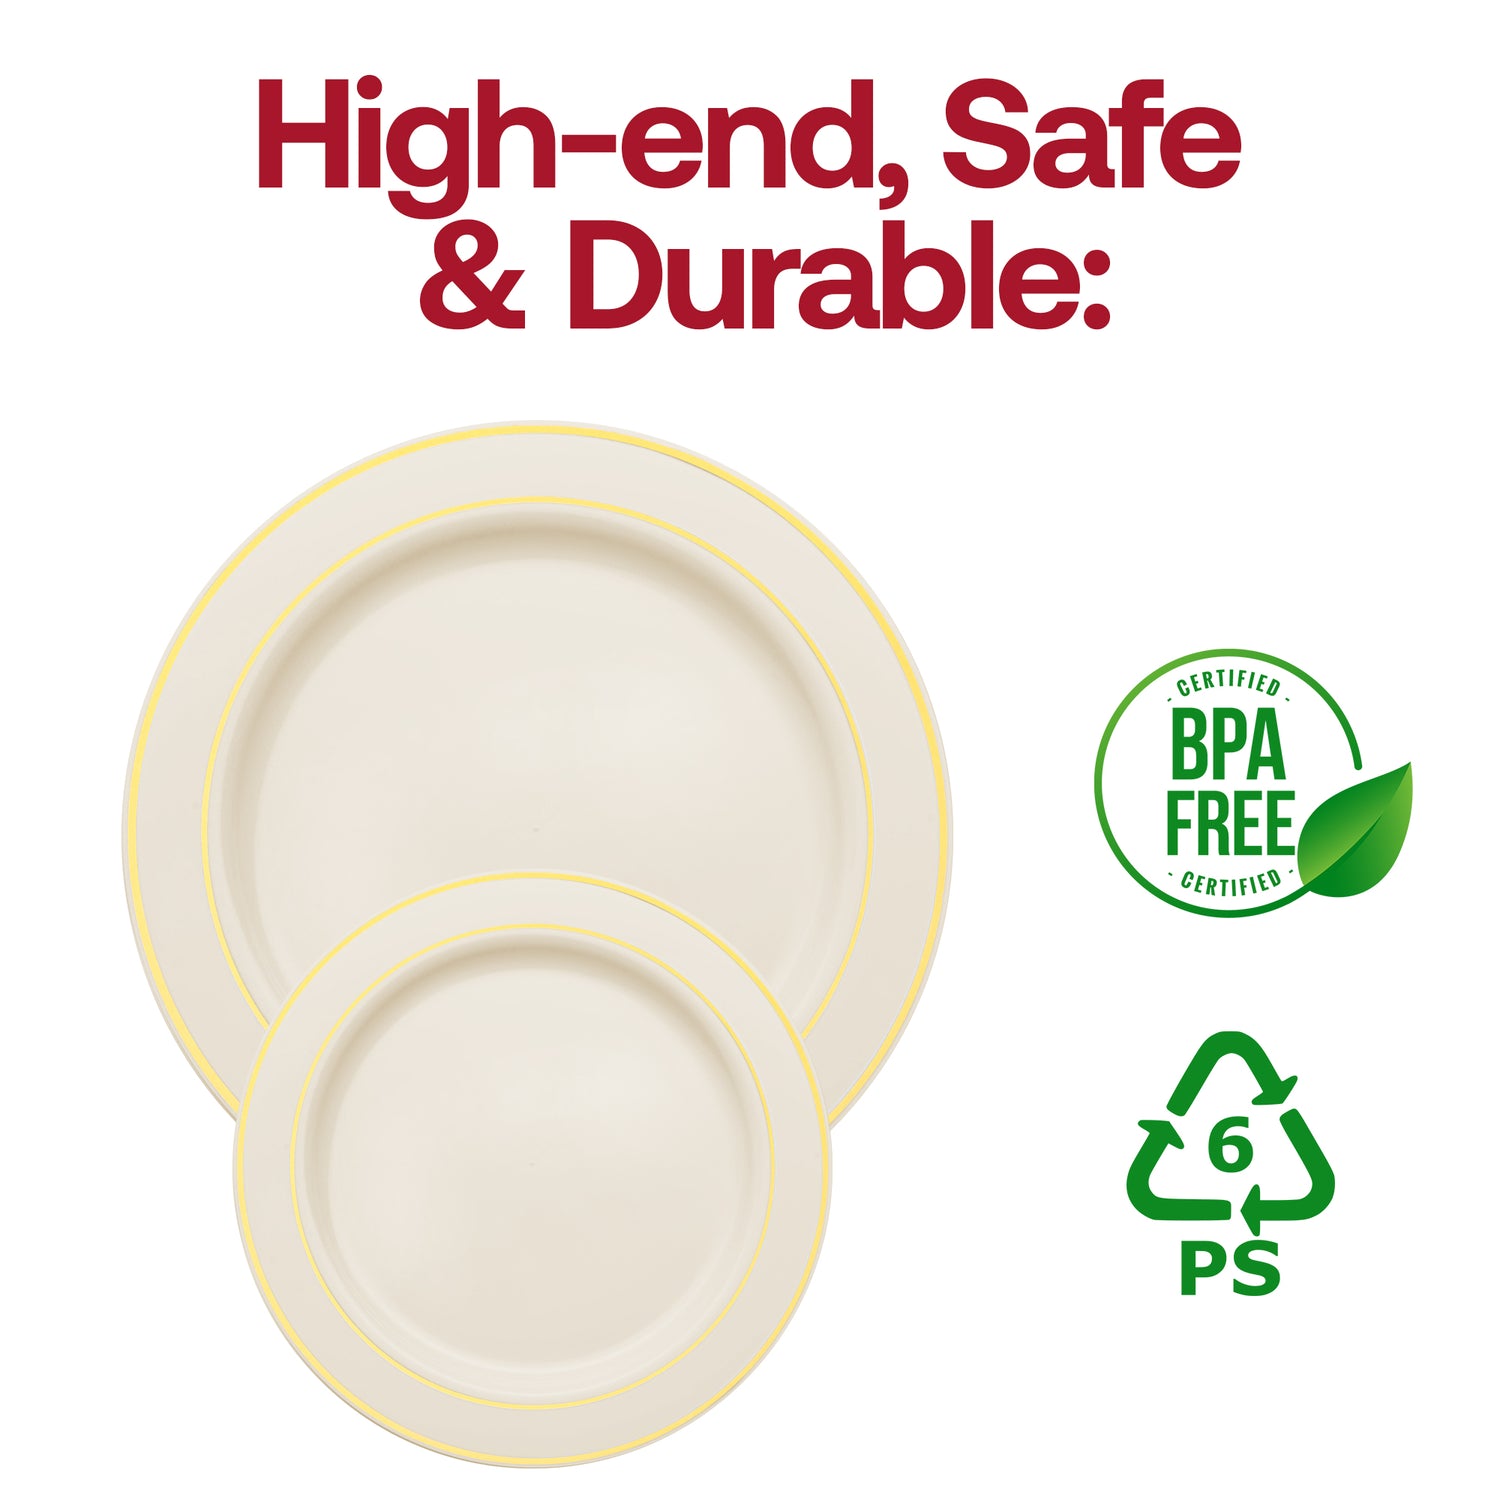 Ivory with Gold Edge Rim Plastic Dinner Plates (10.25") BPA | The Kaya Collection